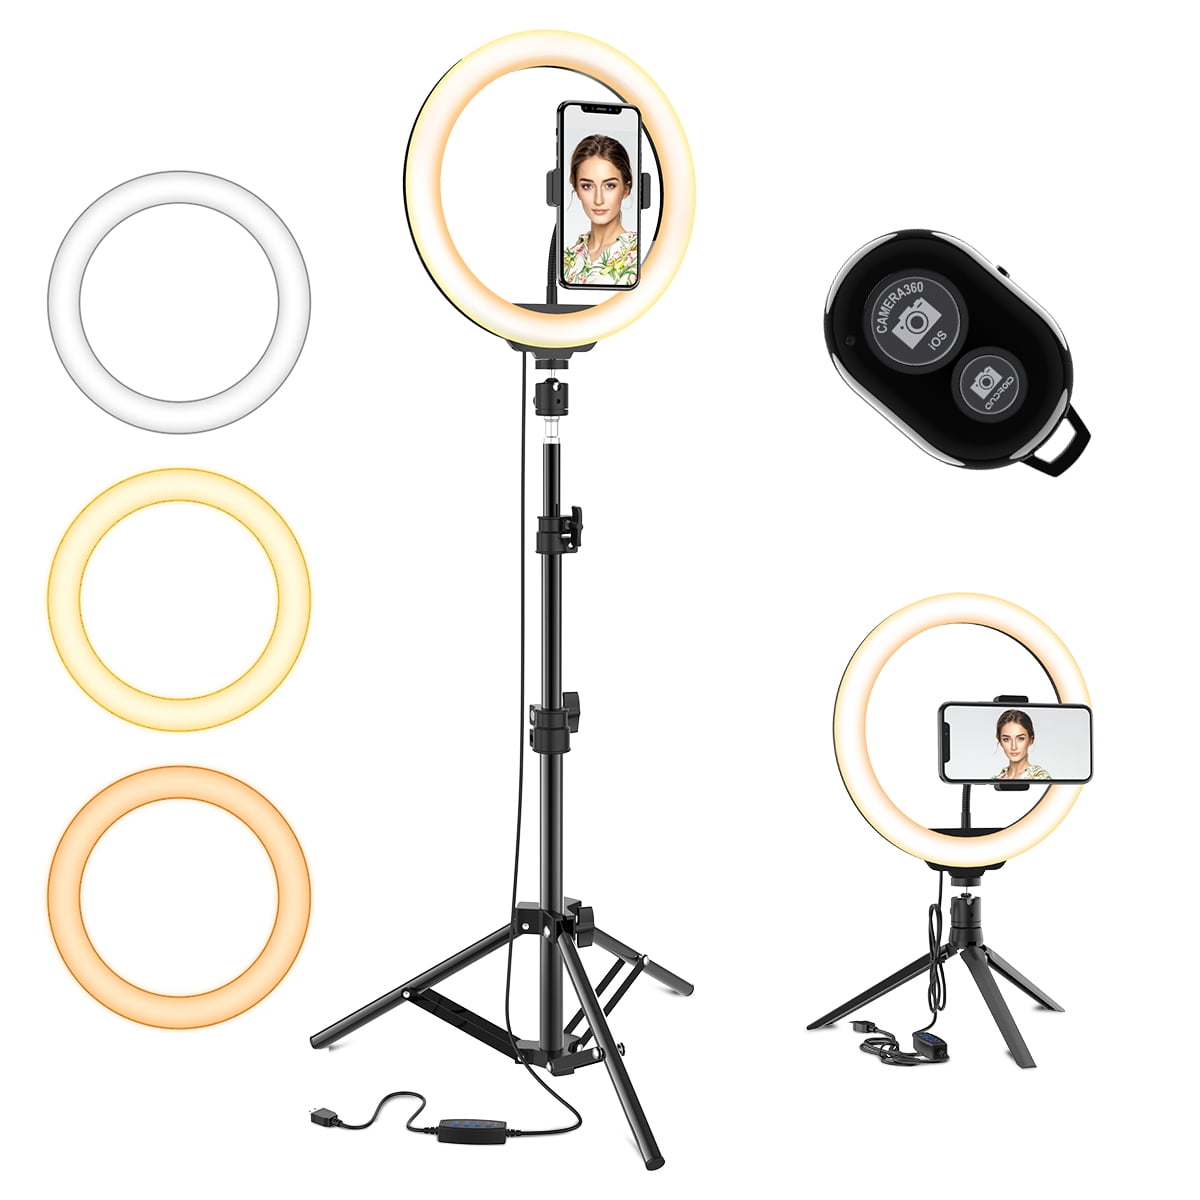 10.2 Selfie Ring Light 29 Colors Metal RGB Ring Light with 61'' Adjustable Tripod Stand/Desktop Stand/ Phone Holder for Live Stream/Makeup/YouTube/TikTok Compatible with iOS/Android Phones